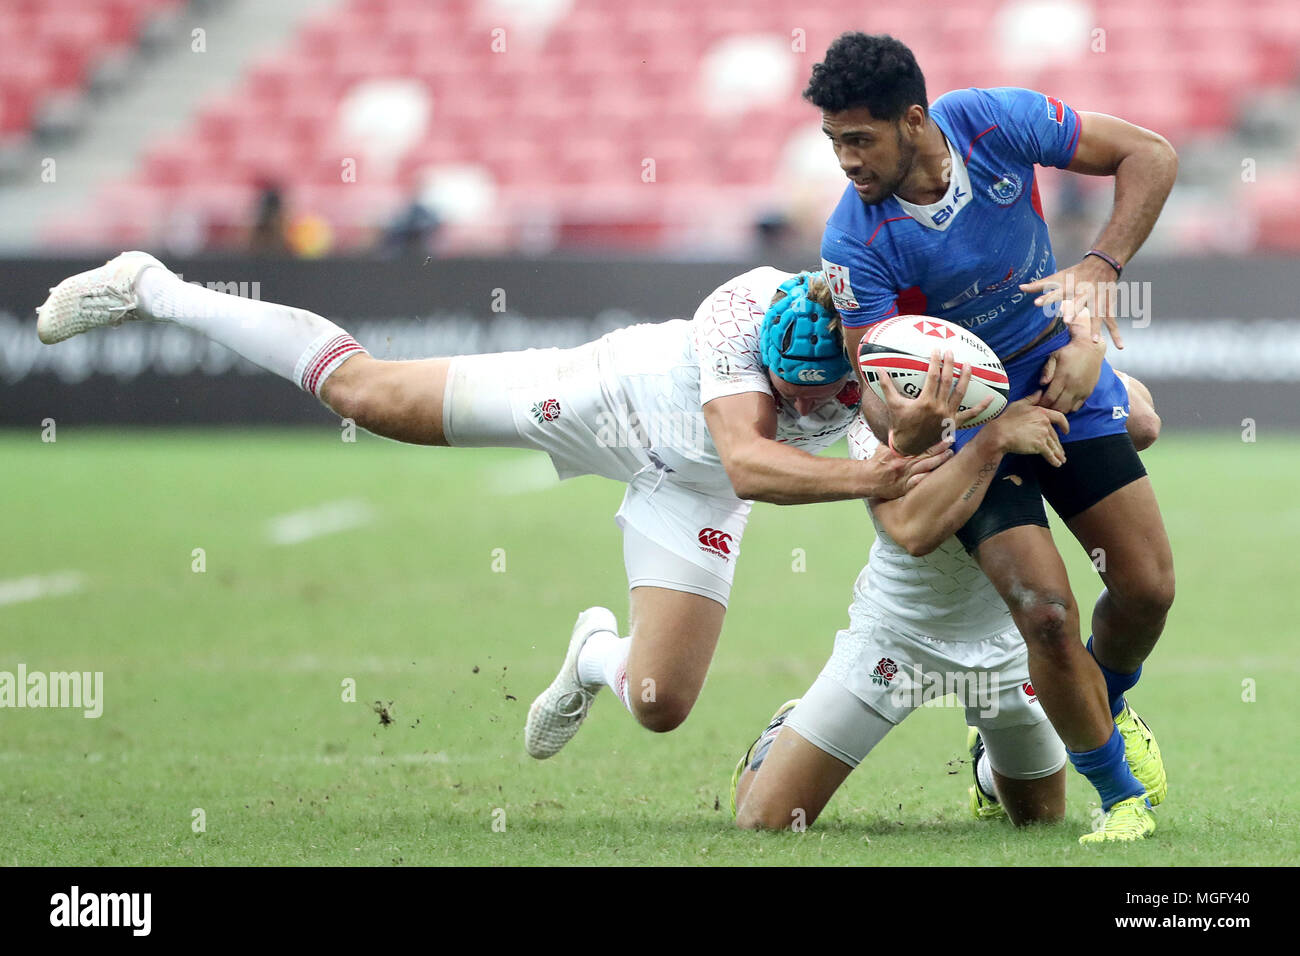 Singapore. 29th Apr, 2018. Elisapeta Alofipo (right) of Samoa is tackled by Richard de Carpentier (left) and Dan Bibby of England during the Cup Quarter Final match between England and Samoa at the Rugby Sevens tournament at the National Stadium. Singapore. Credit: Paul Miller/ZUMA Wire/Alamy Live News Stock Photo